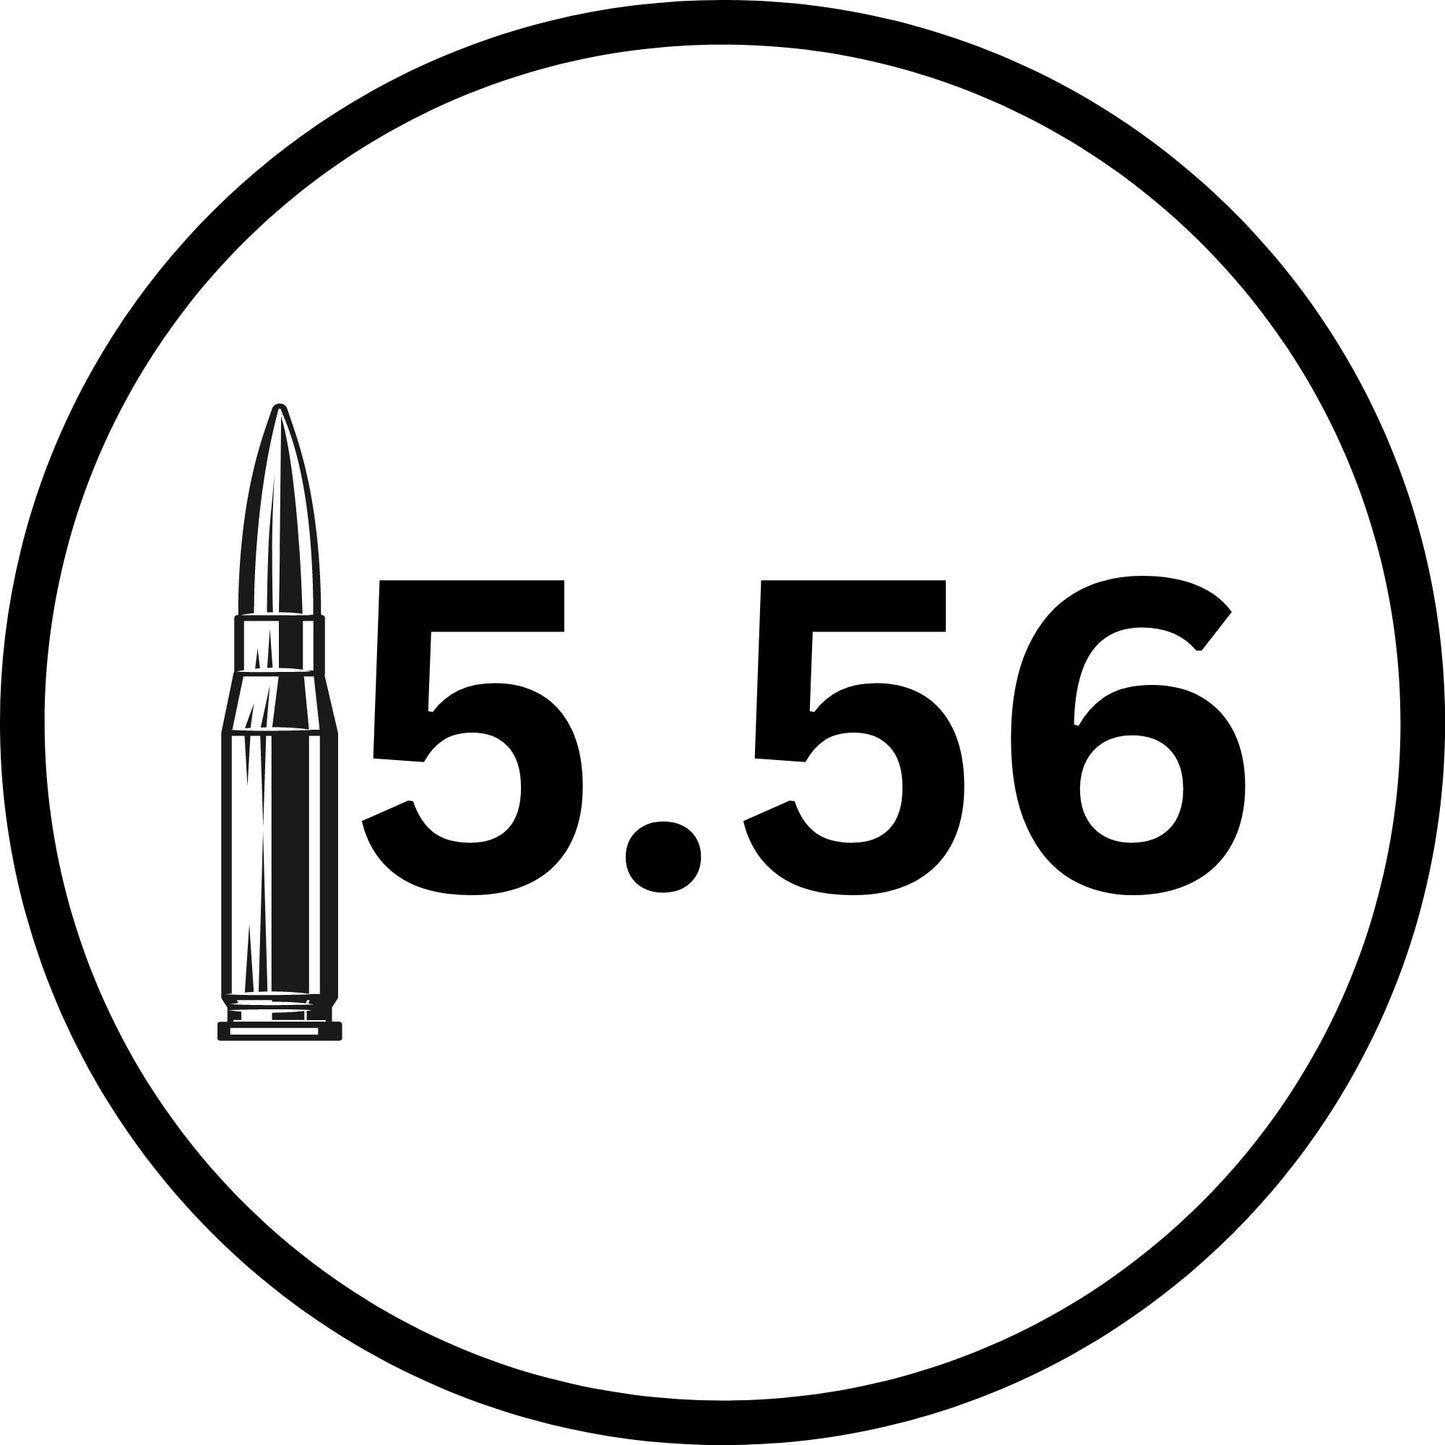 "Patriotic 5.56 White T-shirt featuring the caliber '5.56' and American flag design."